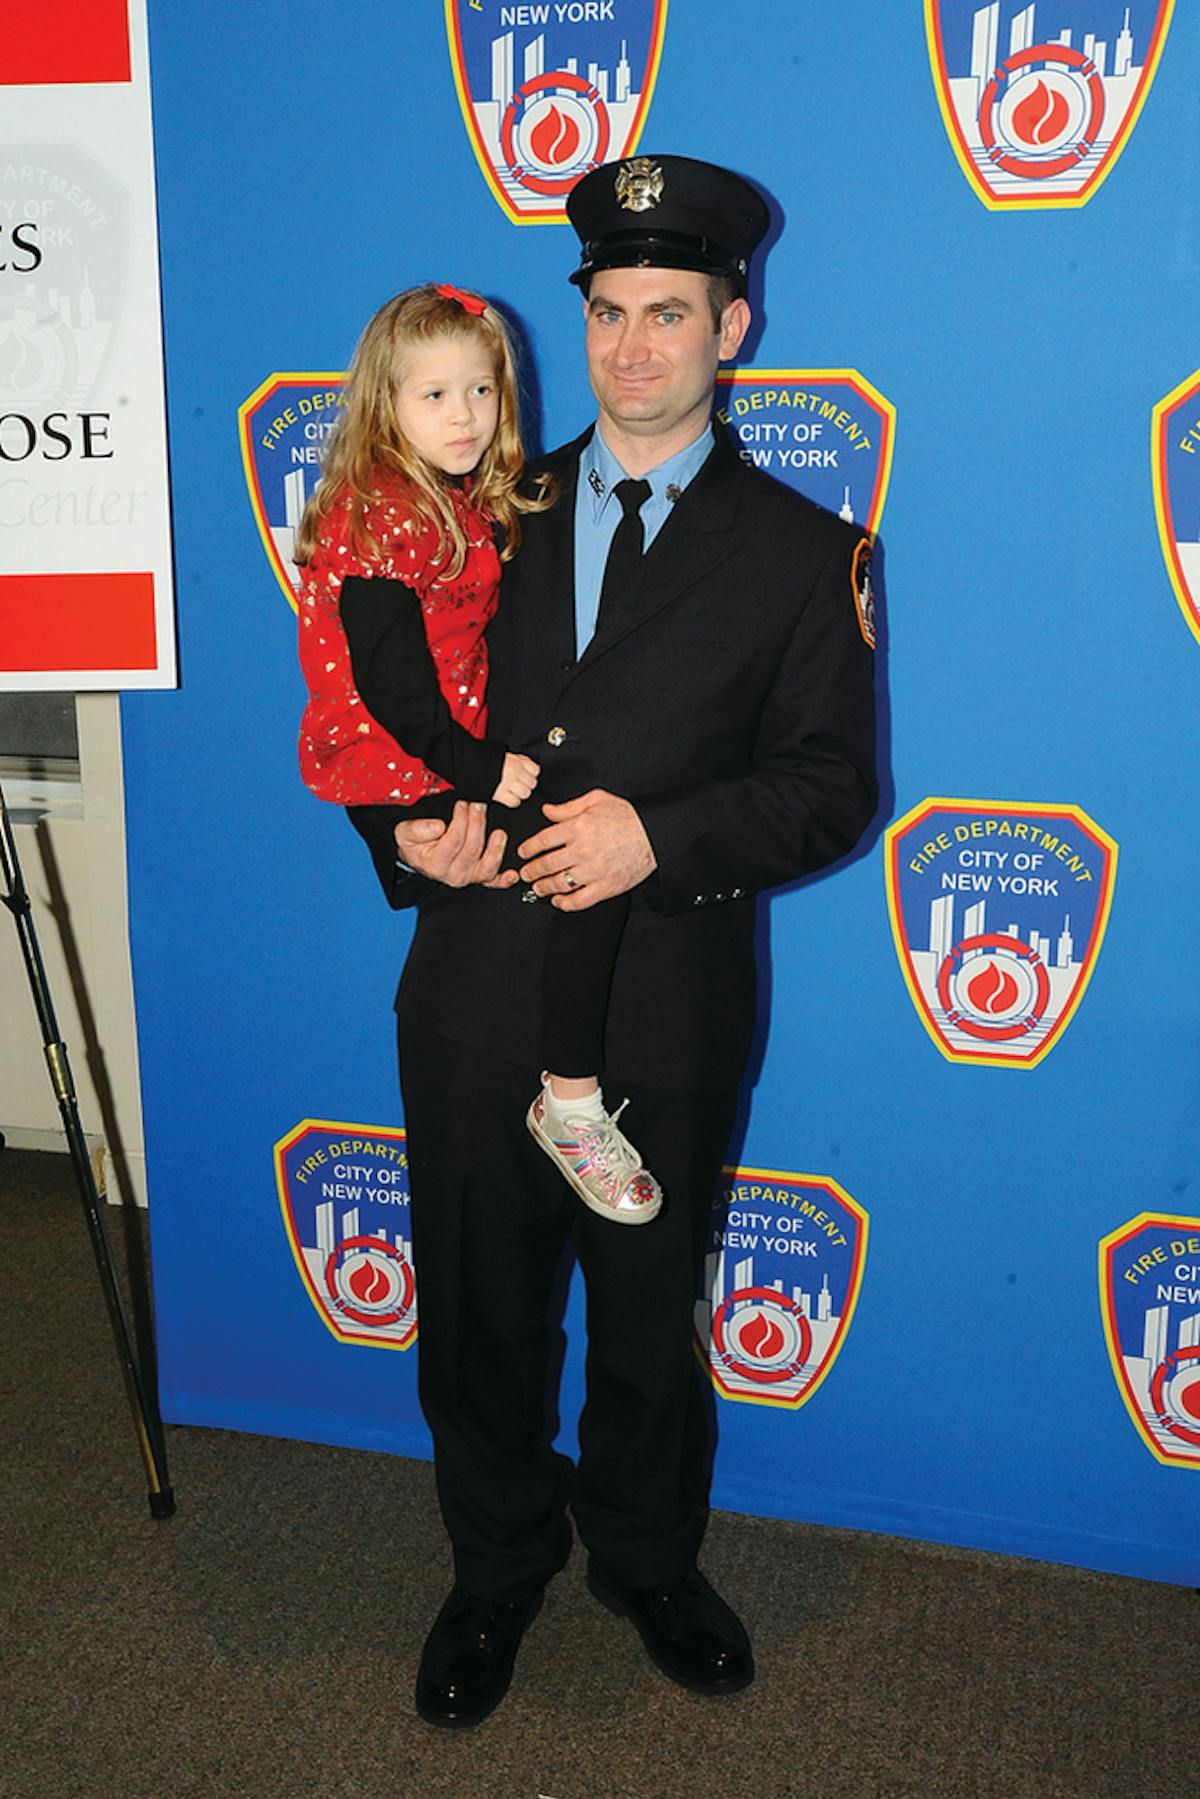 FDNY Firefighter James Wildes holds 6-year-old Alise Mareerose Williams of Evansdale, IA, during the Honor Roll of Life ceremony. Firefighter Wildes donated life-saving stem cells to Alise in 2009.